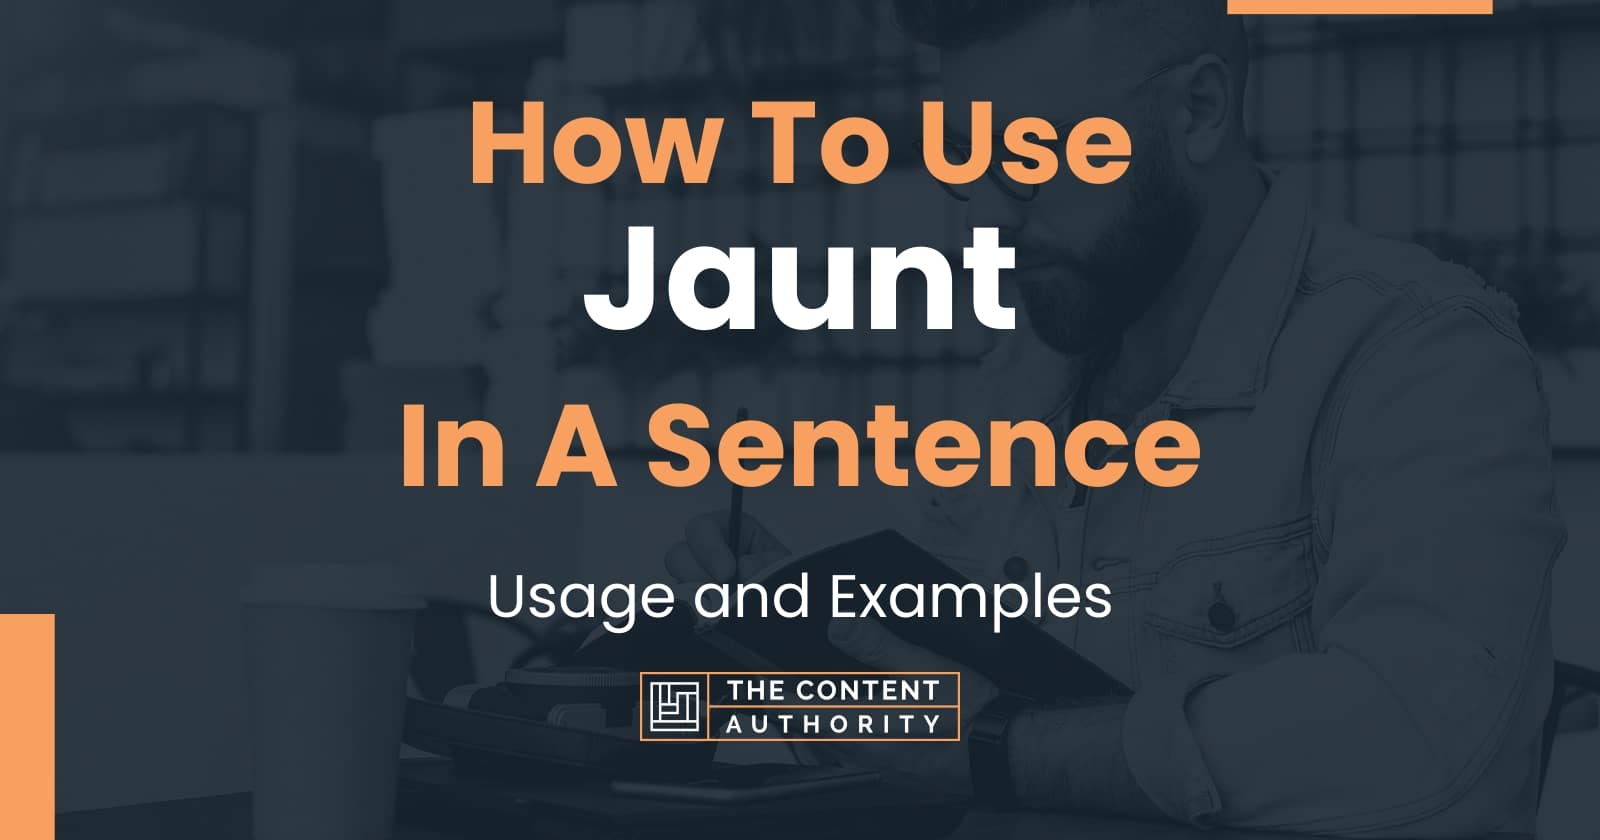 jaunt meaning and sentence